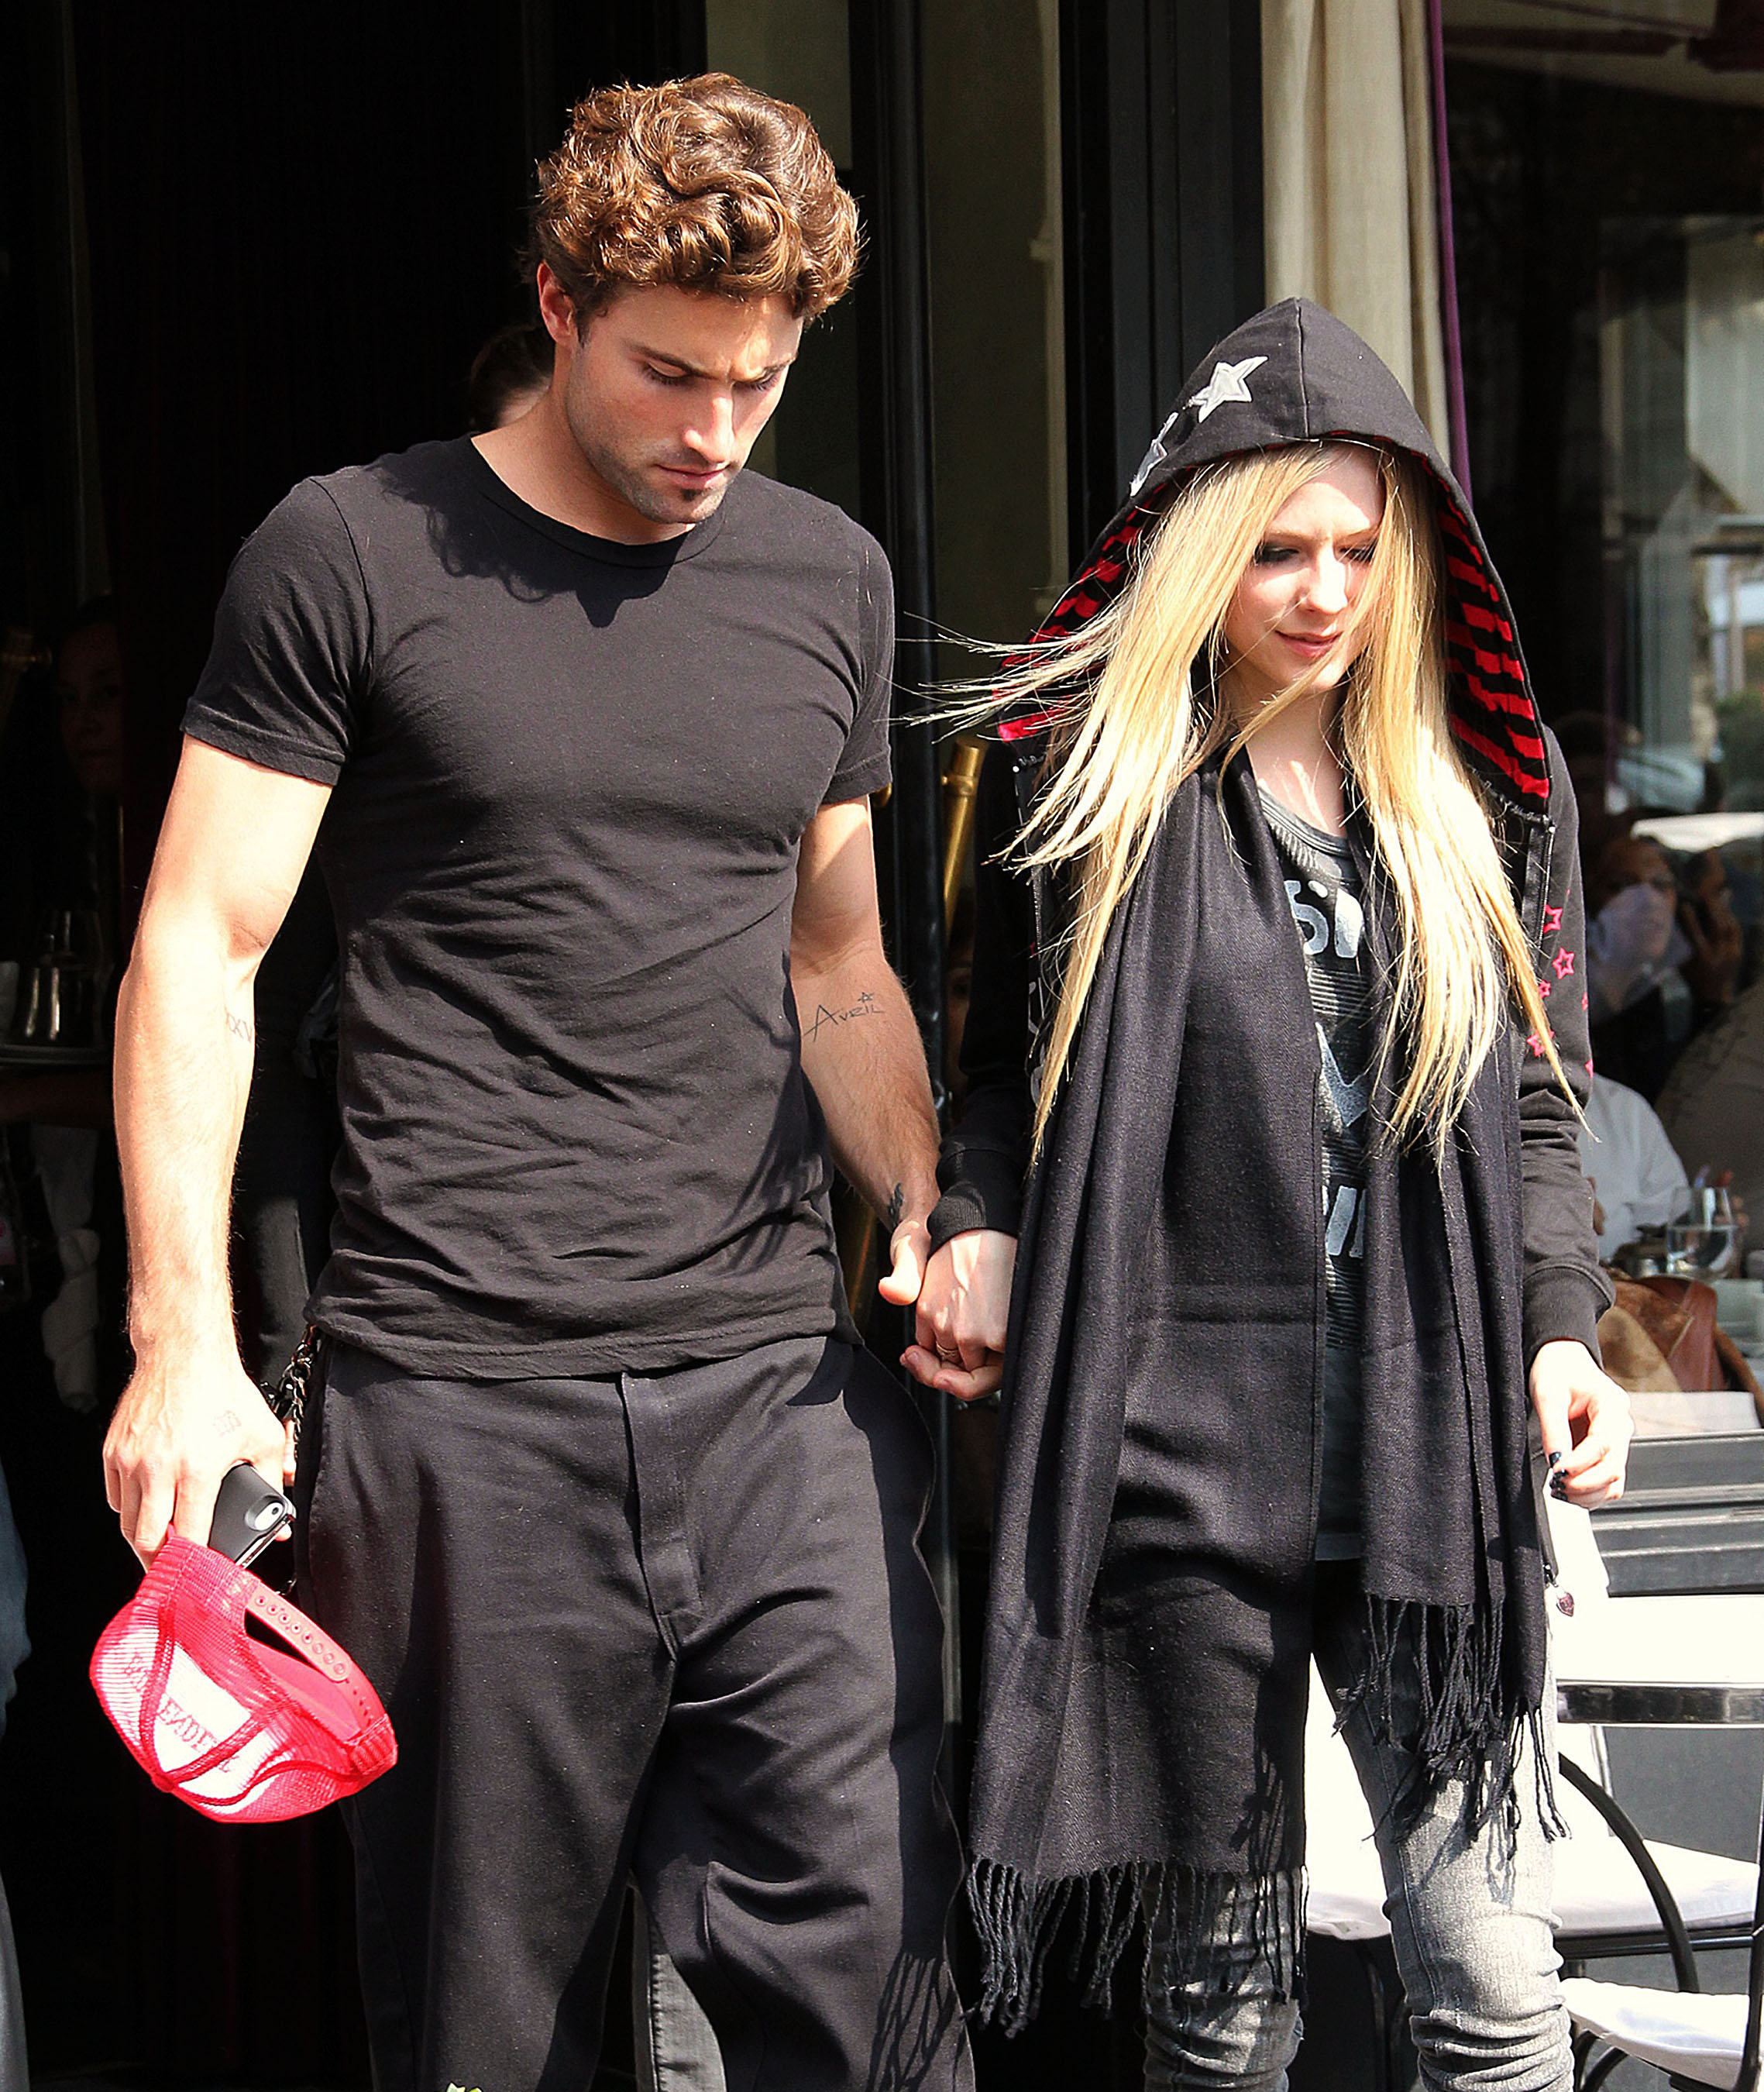 Avril and Brody reportedly call it quits after two year relationship